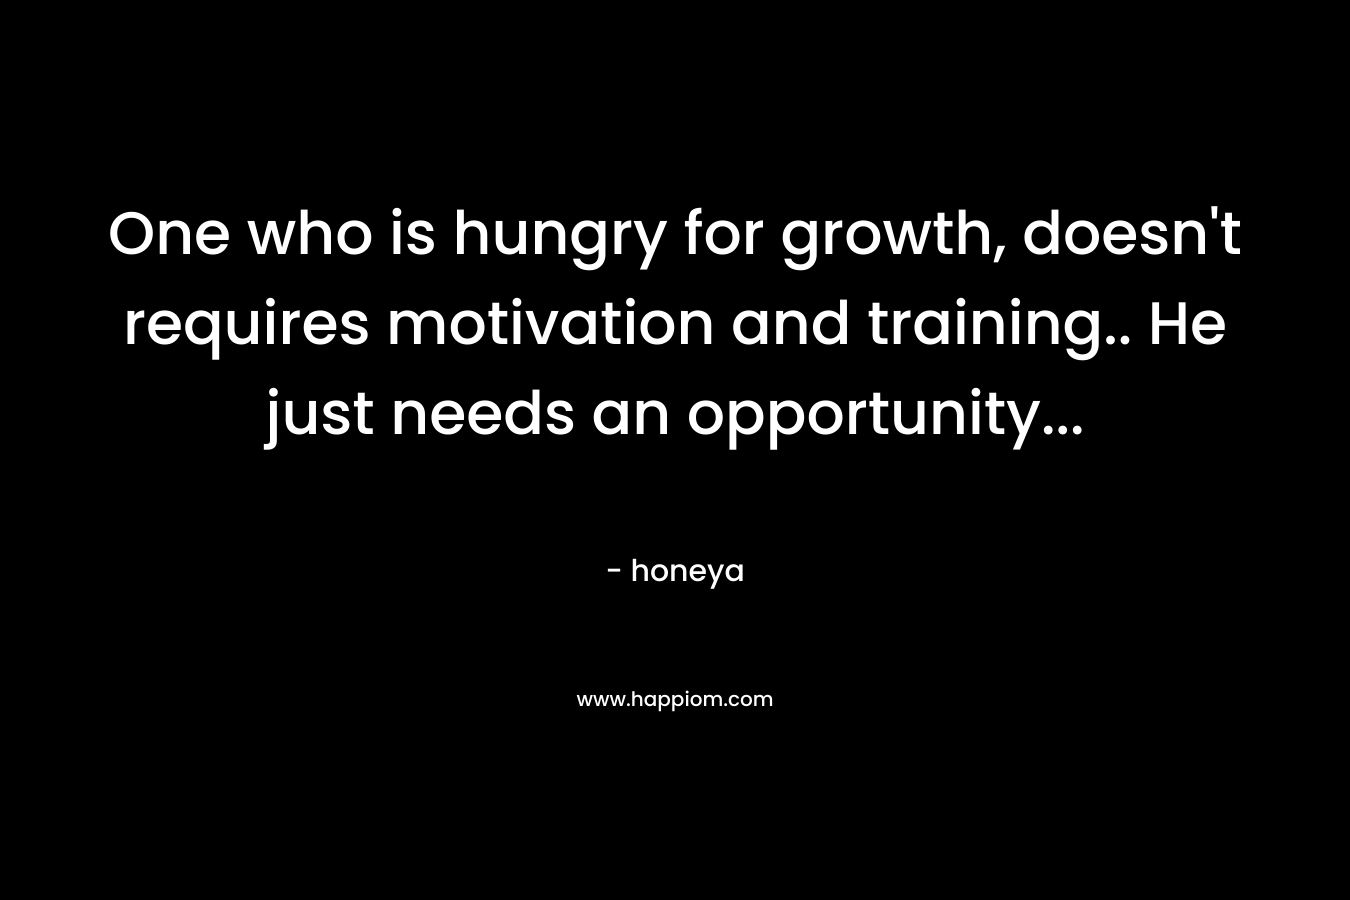 One who is hungry for growth, doesn't requires motivation and training.. He just needs an opportunity...